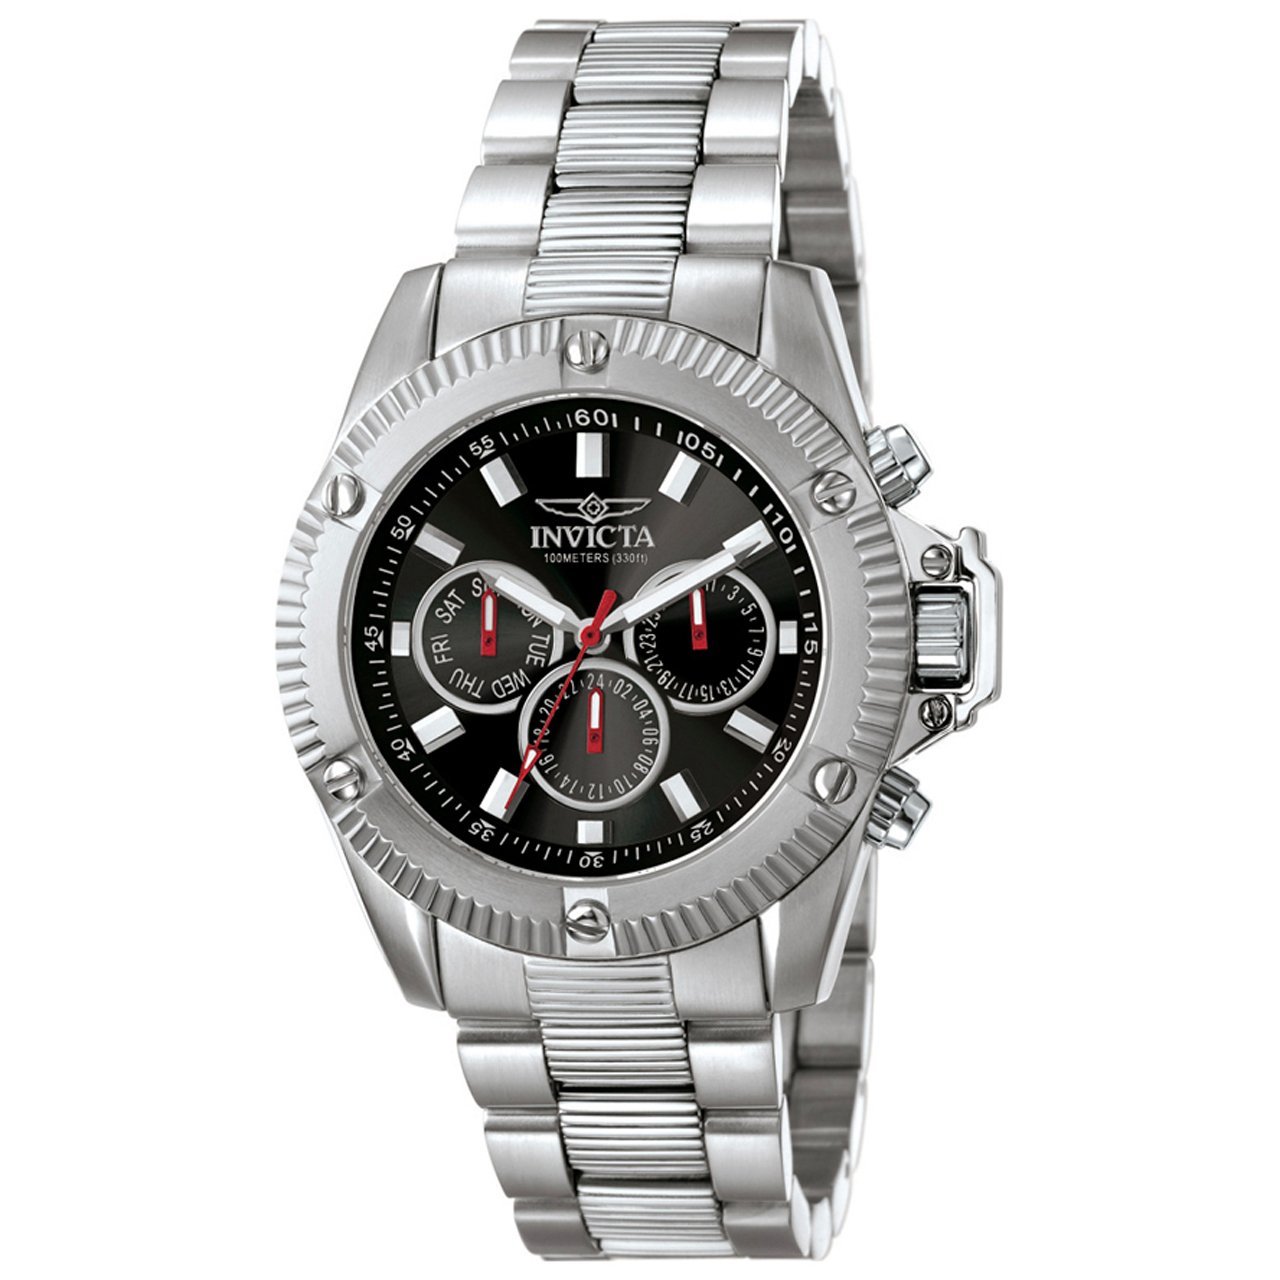 Invicta Men's 5717 II Collection Stainless Steel Watch $73.95